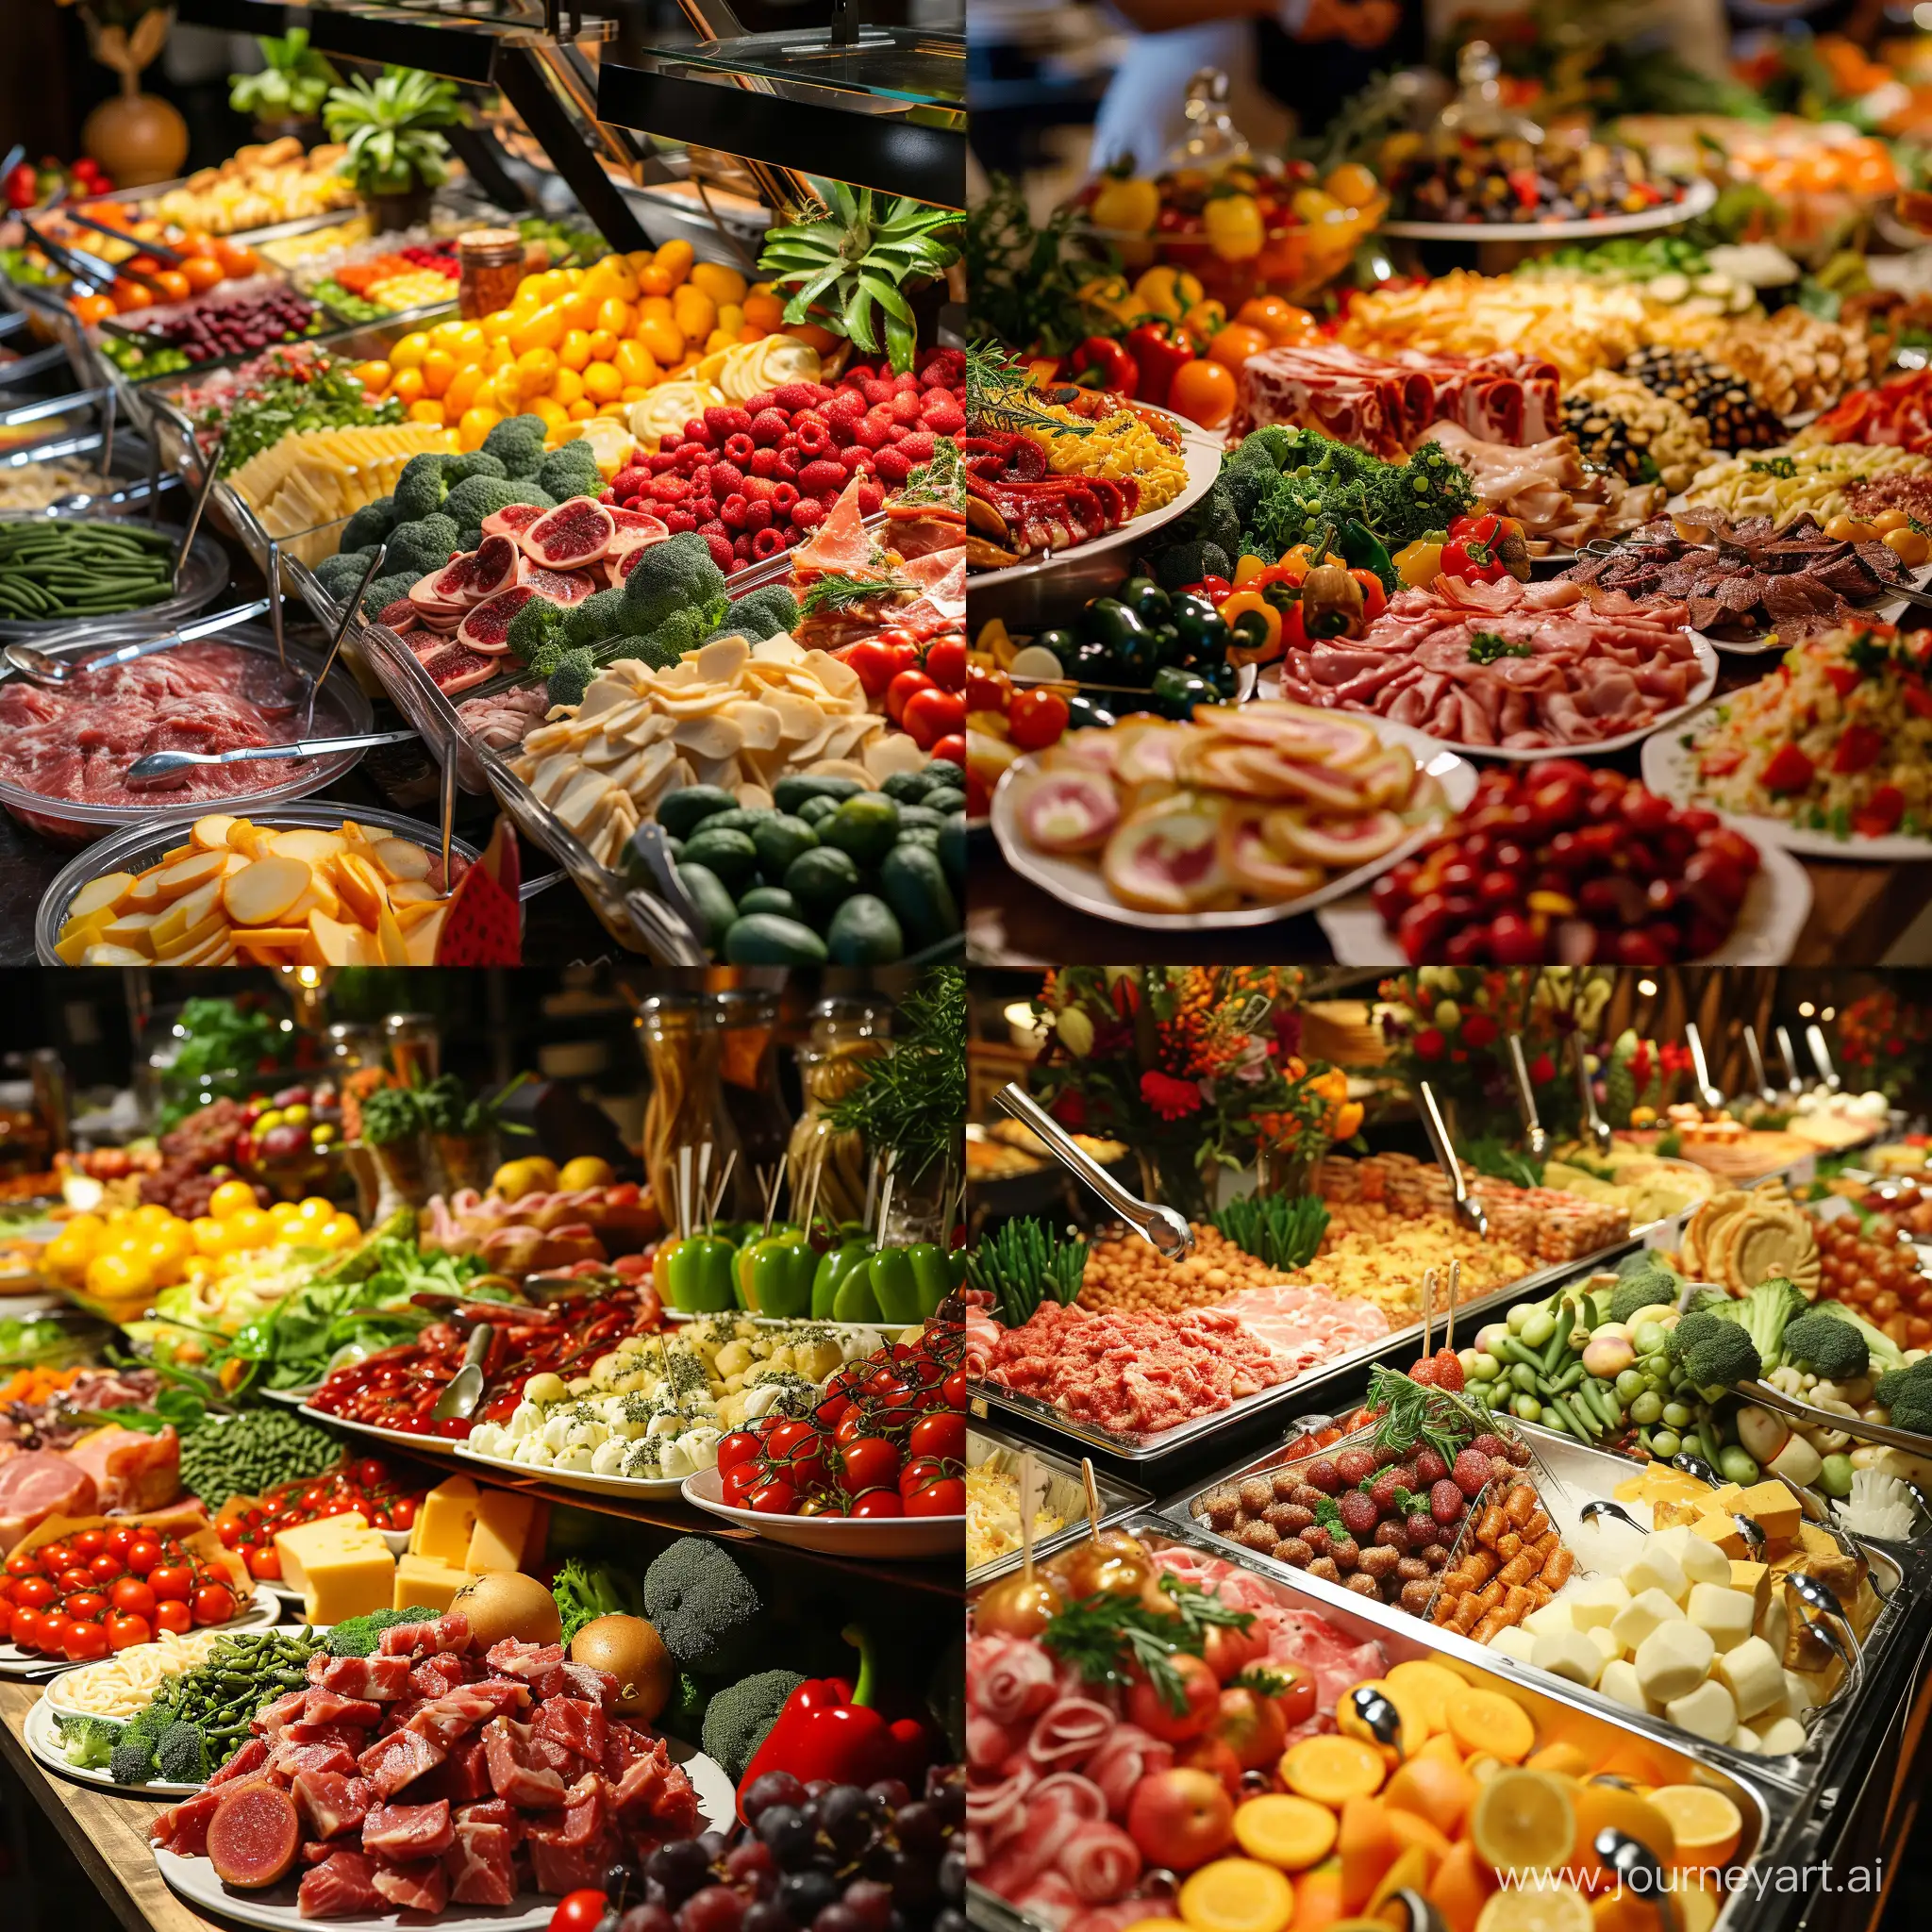 Opulent-Buffet-Spread-with-a-Variety-of-Sumptuous-Foods